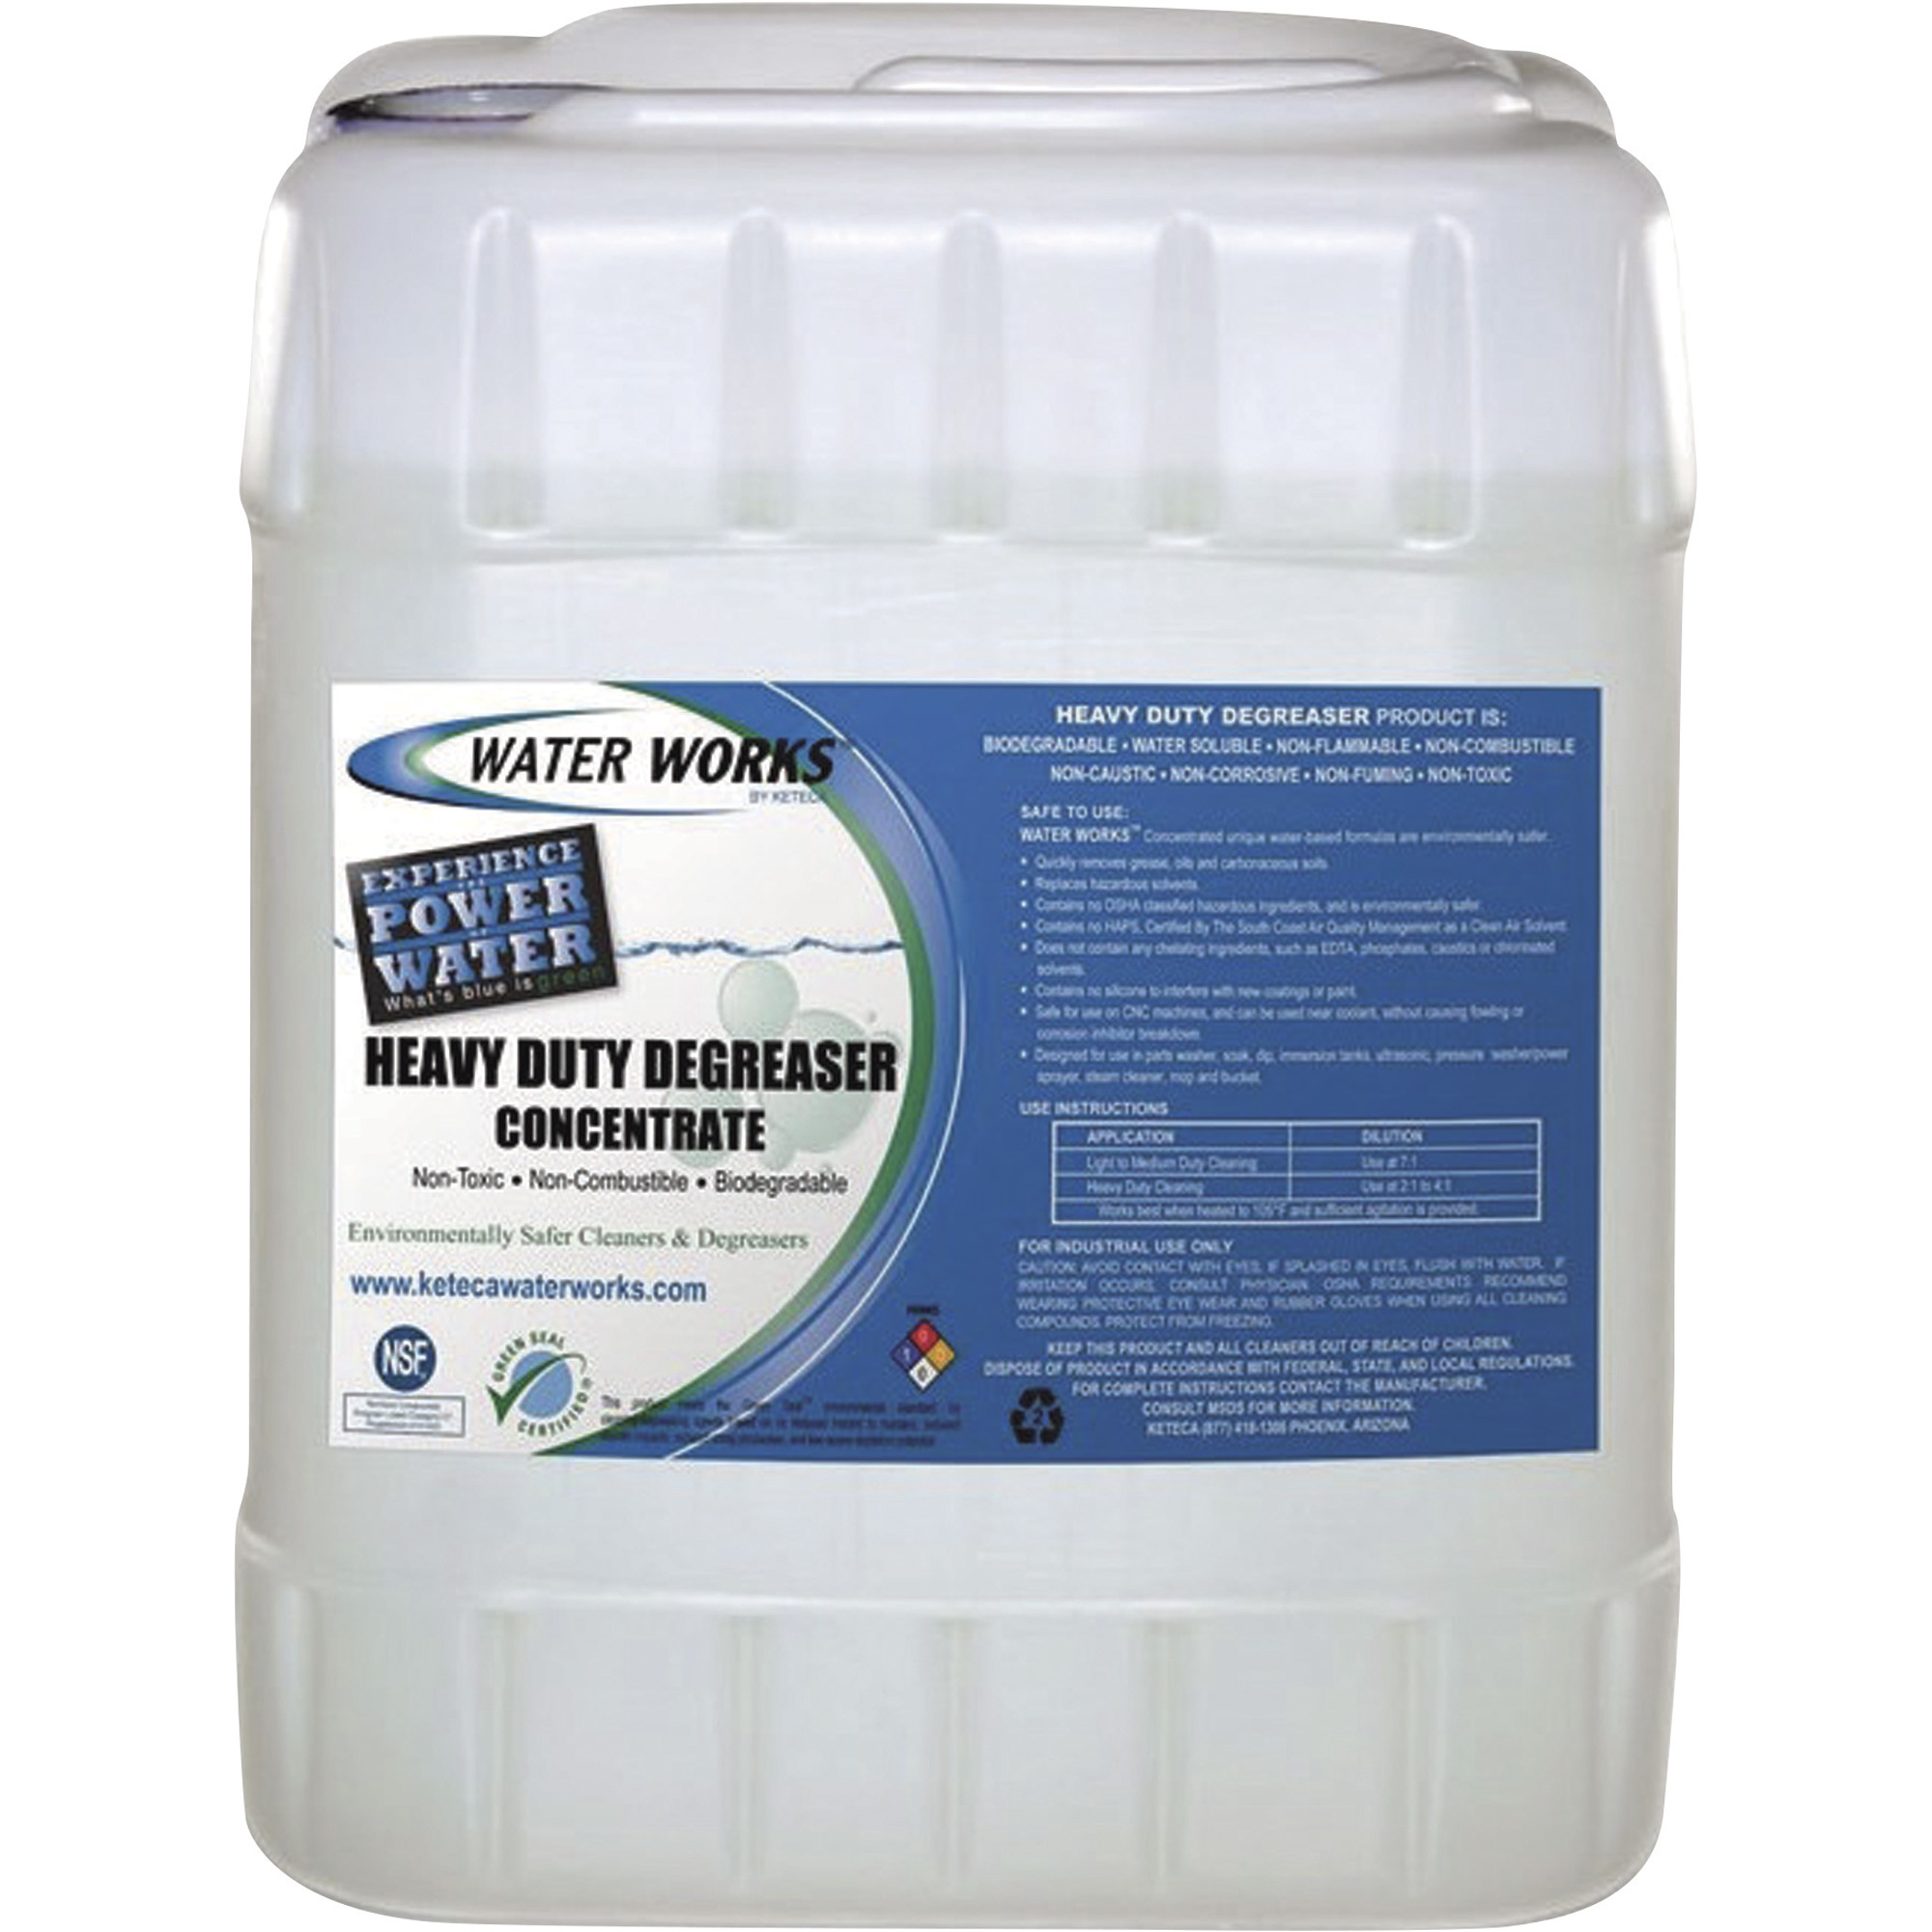 Parts Washer Aqueous Heavy-Duty Degreaser Concentrate â 5-Gallon